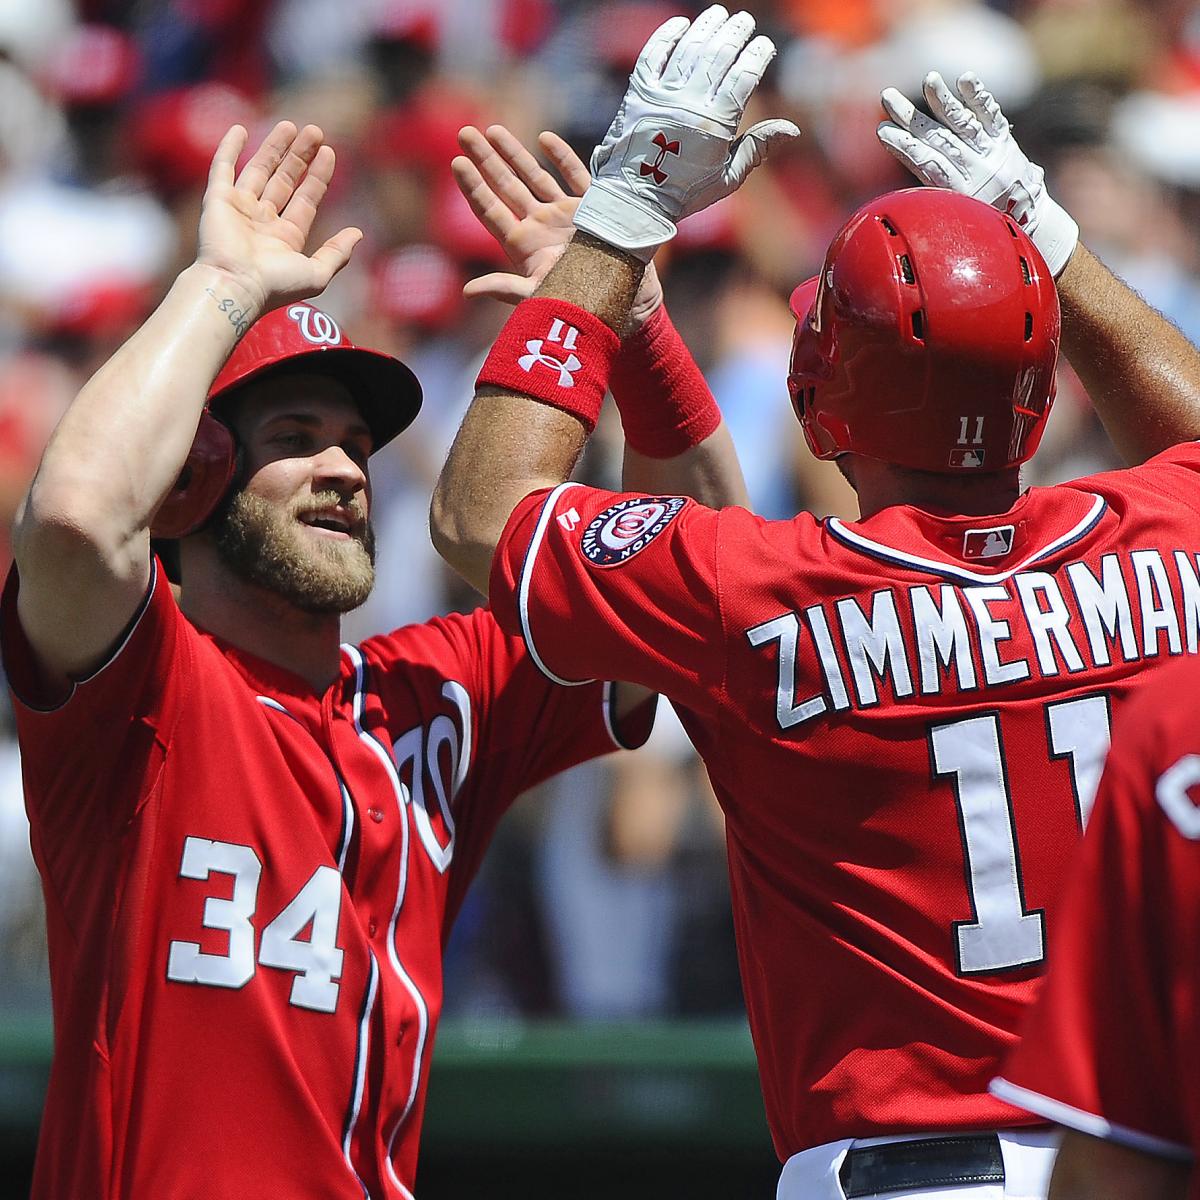 Projecting Whether These Washington Nationals Players Can Make the Hall